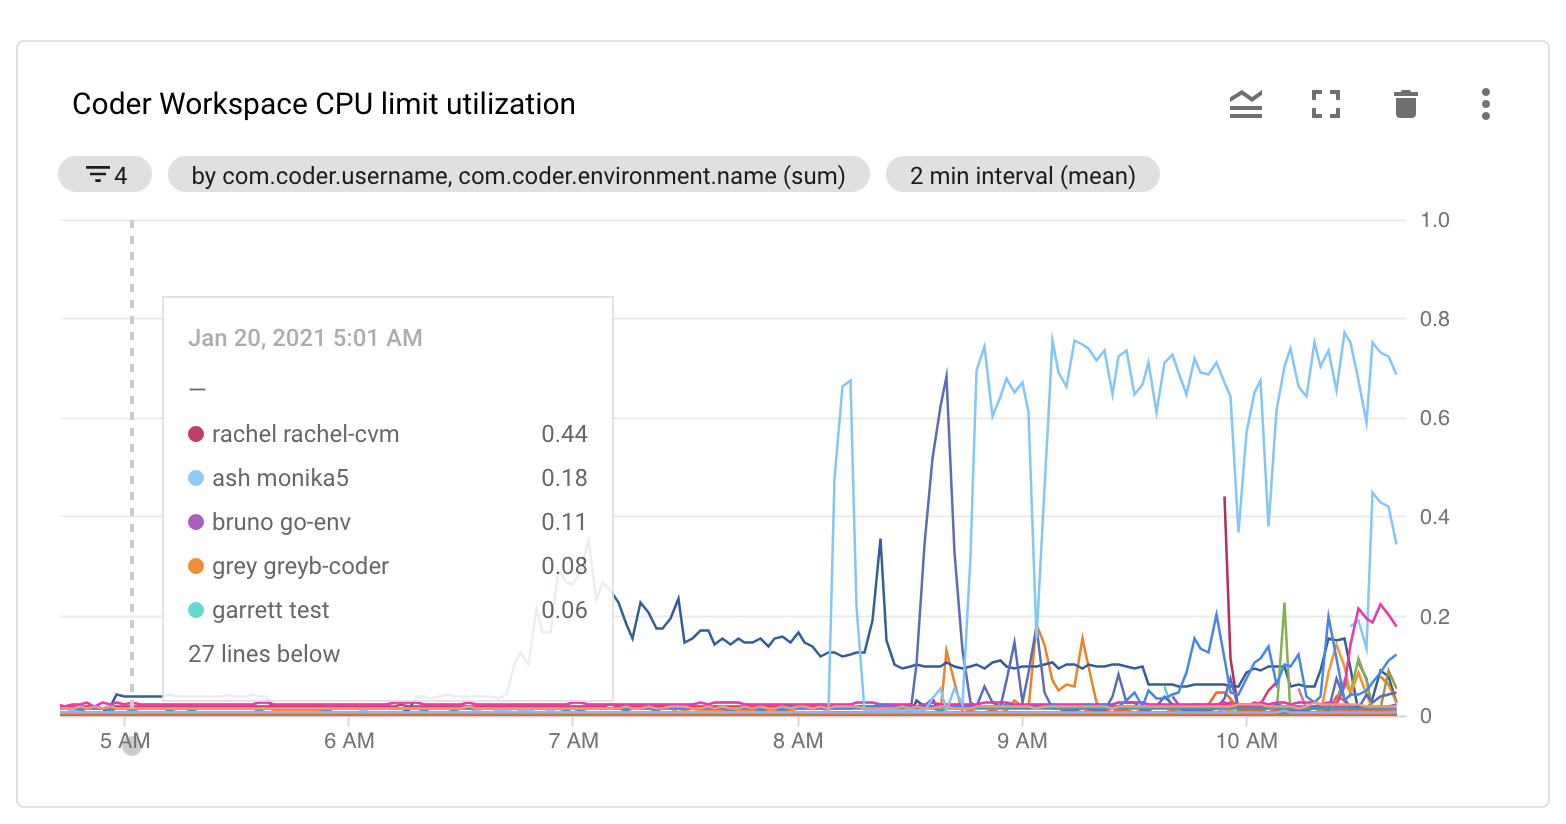 Monitoring CPU Utilization by environment and user